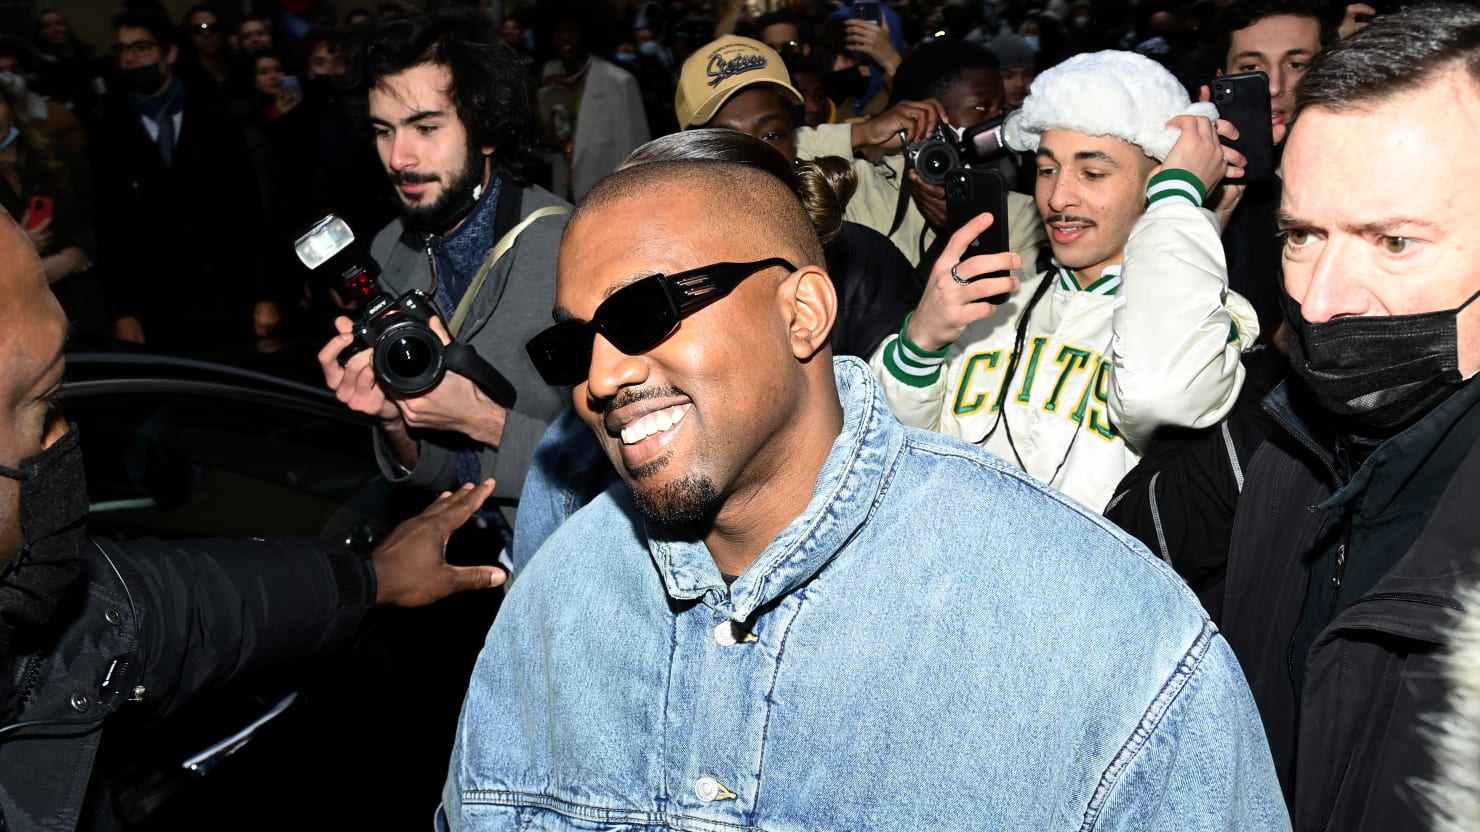 Australia Tells Kanye West That He Can Come Tour, But Only If He’s